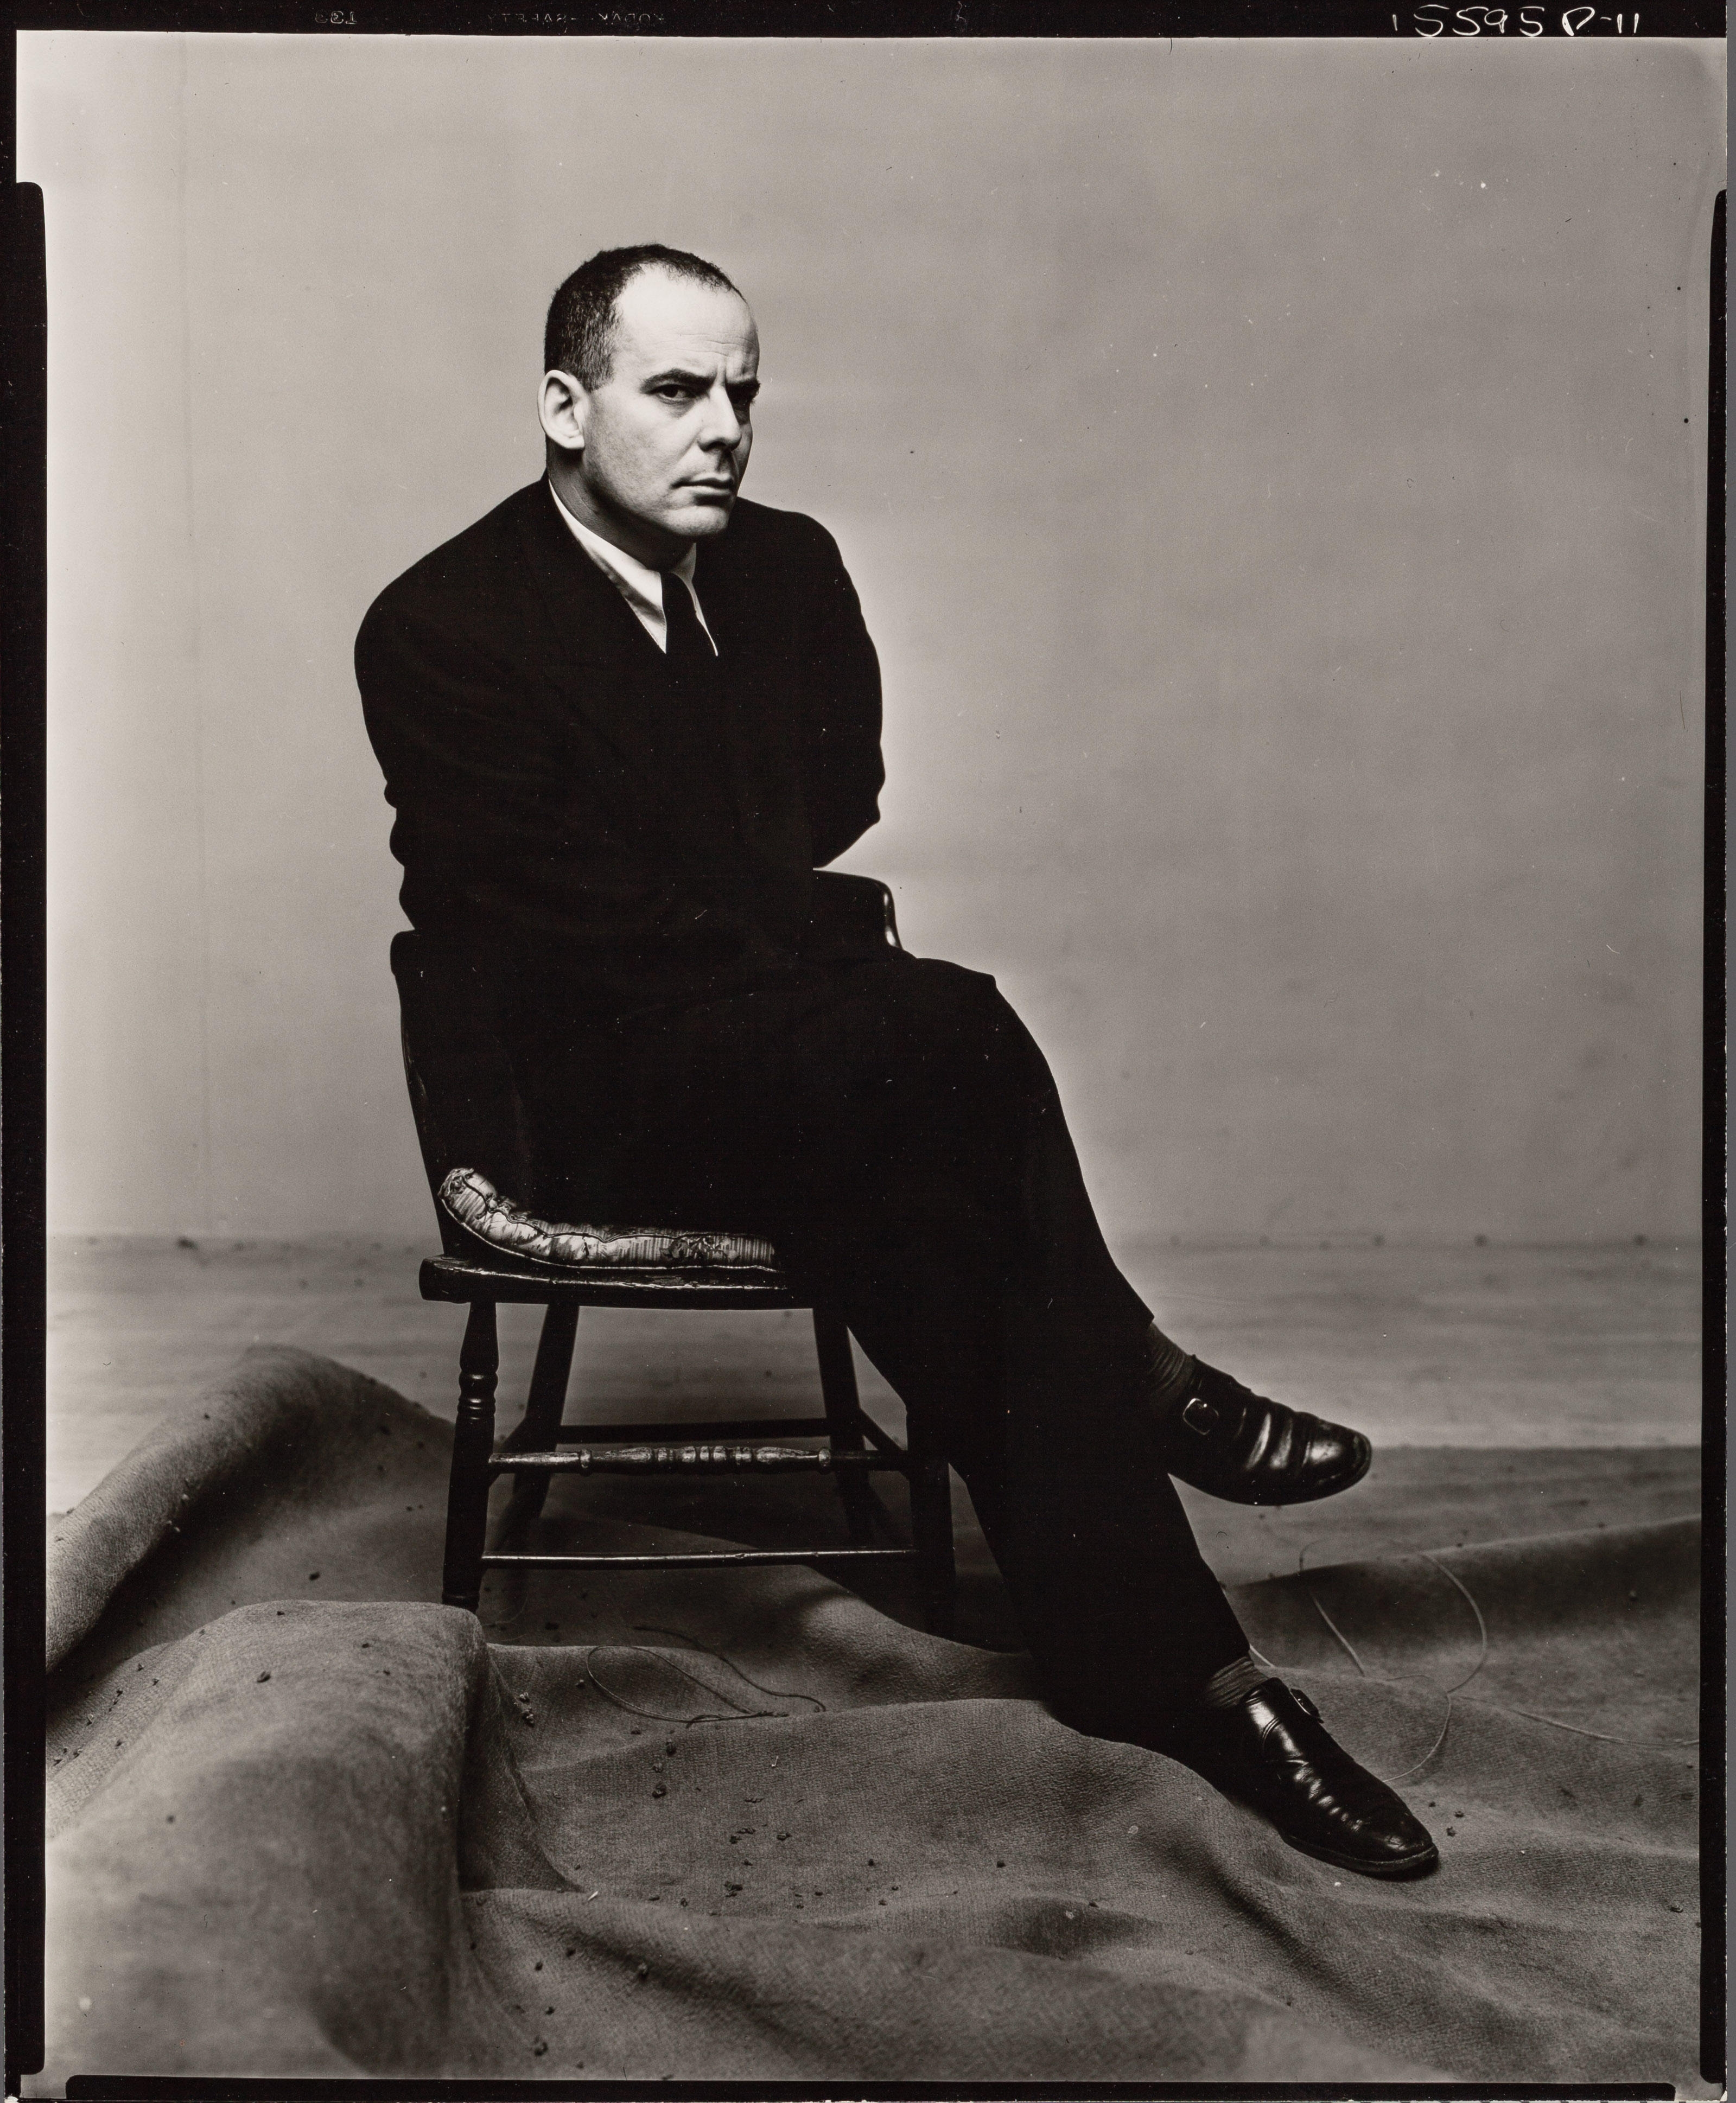 The Ballet Writer Lincoln Kirstein by Irving Penn, 1949